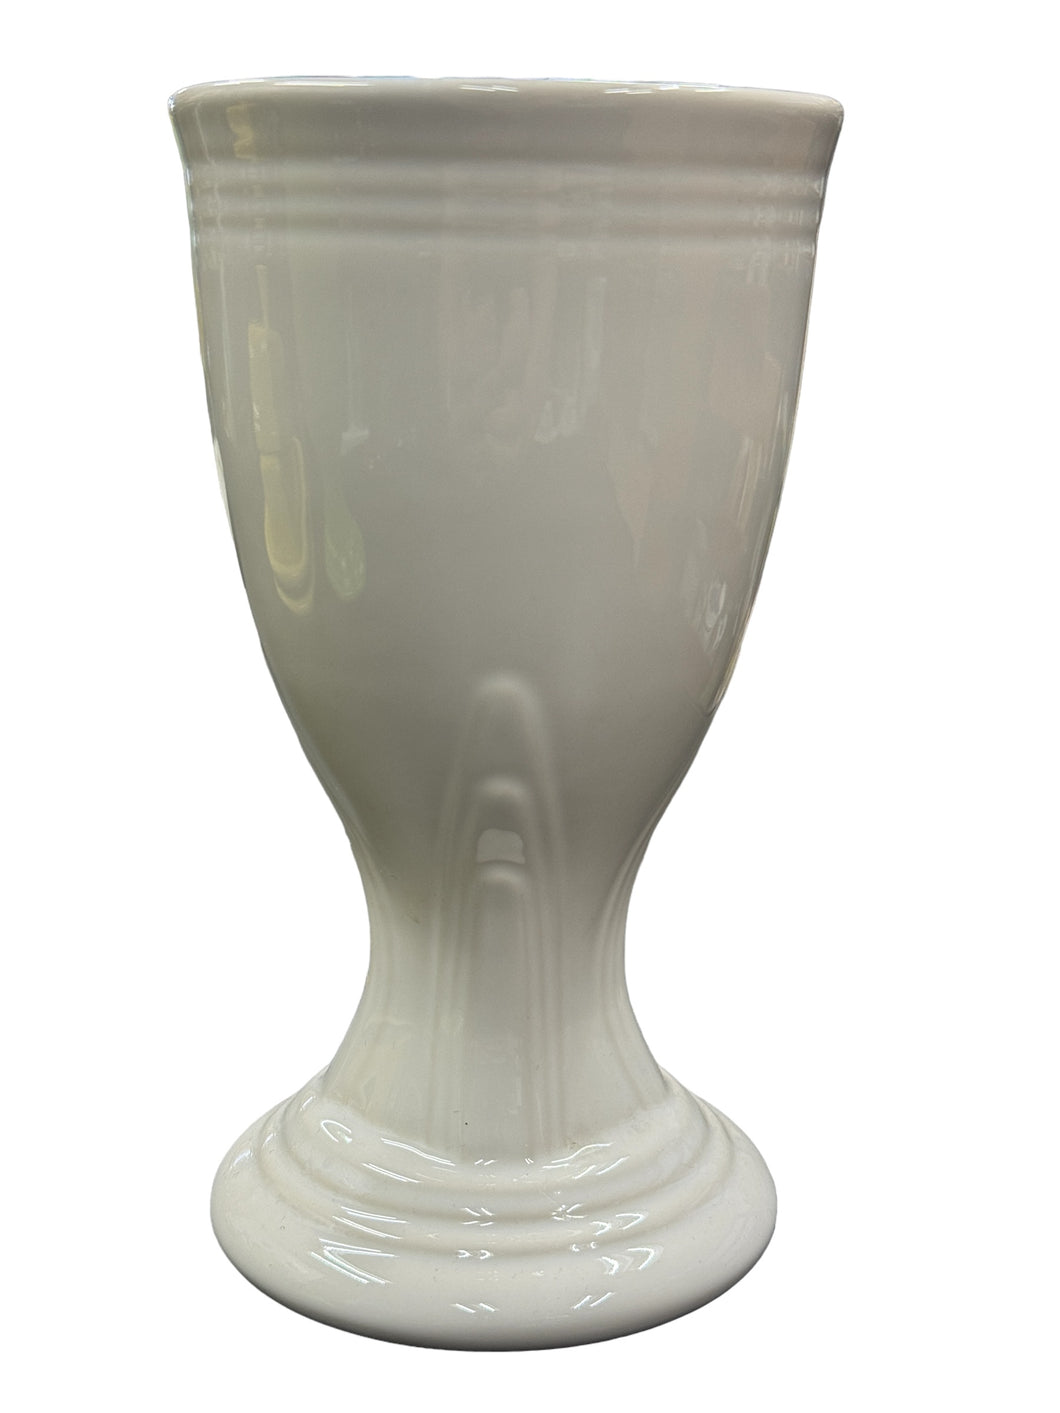 Fiesta Bloomingdales White Goblet 1st Quality